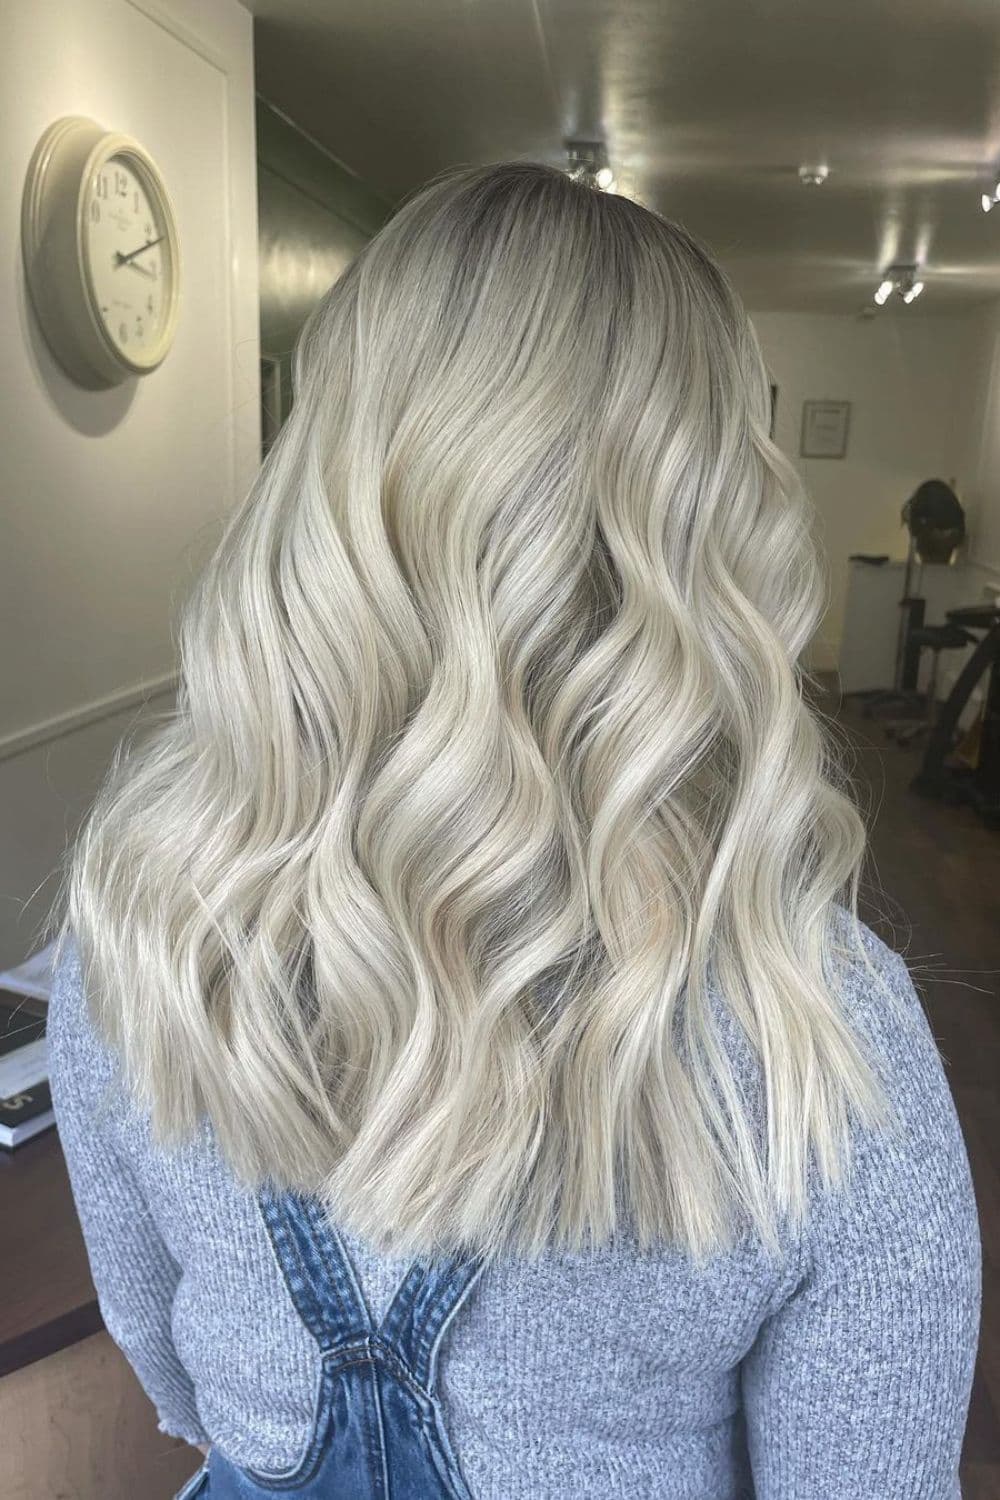 A woman with a long, wavy pearl blonde.